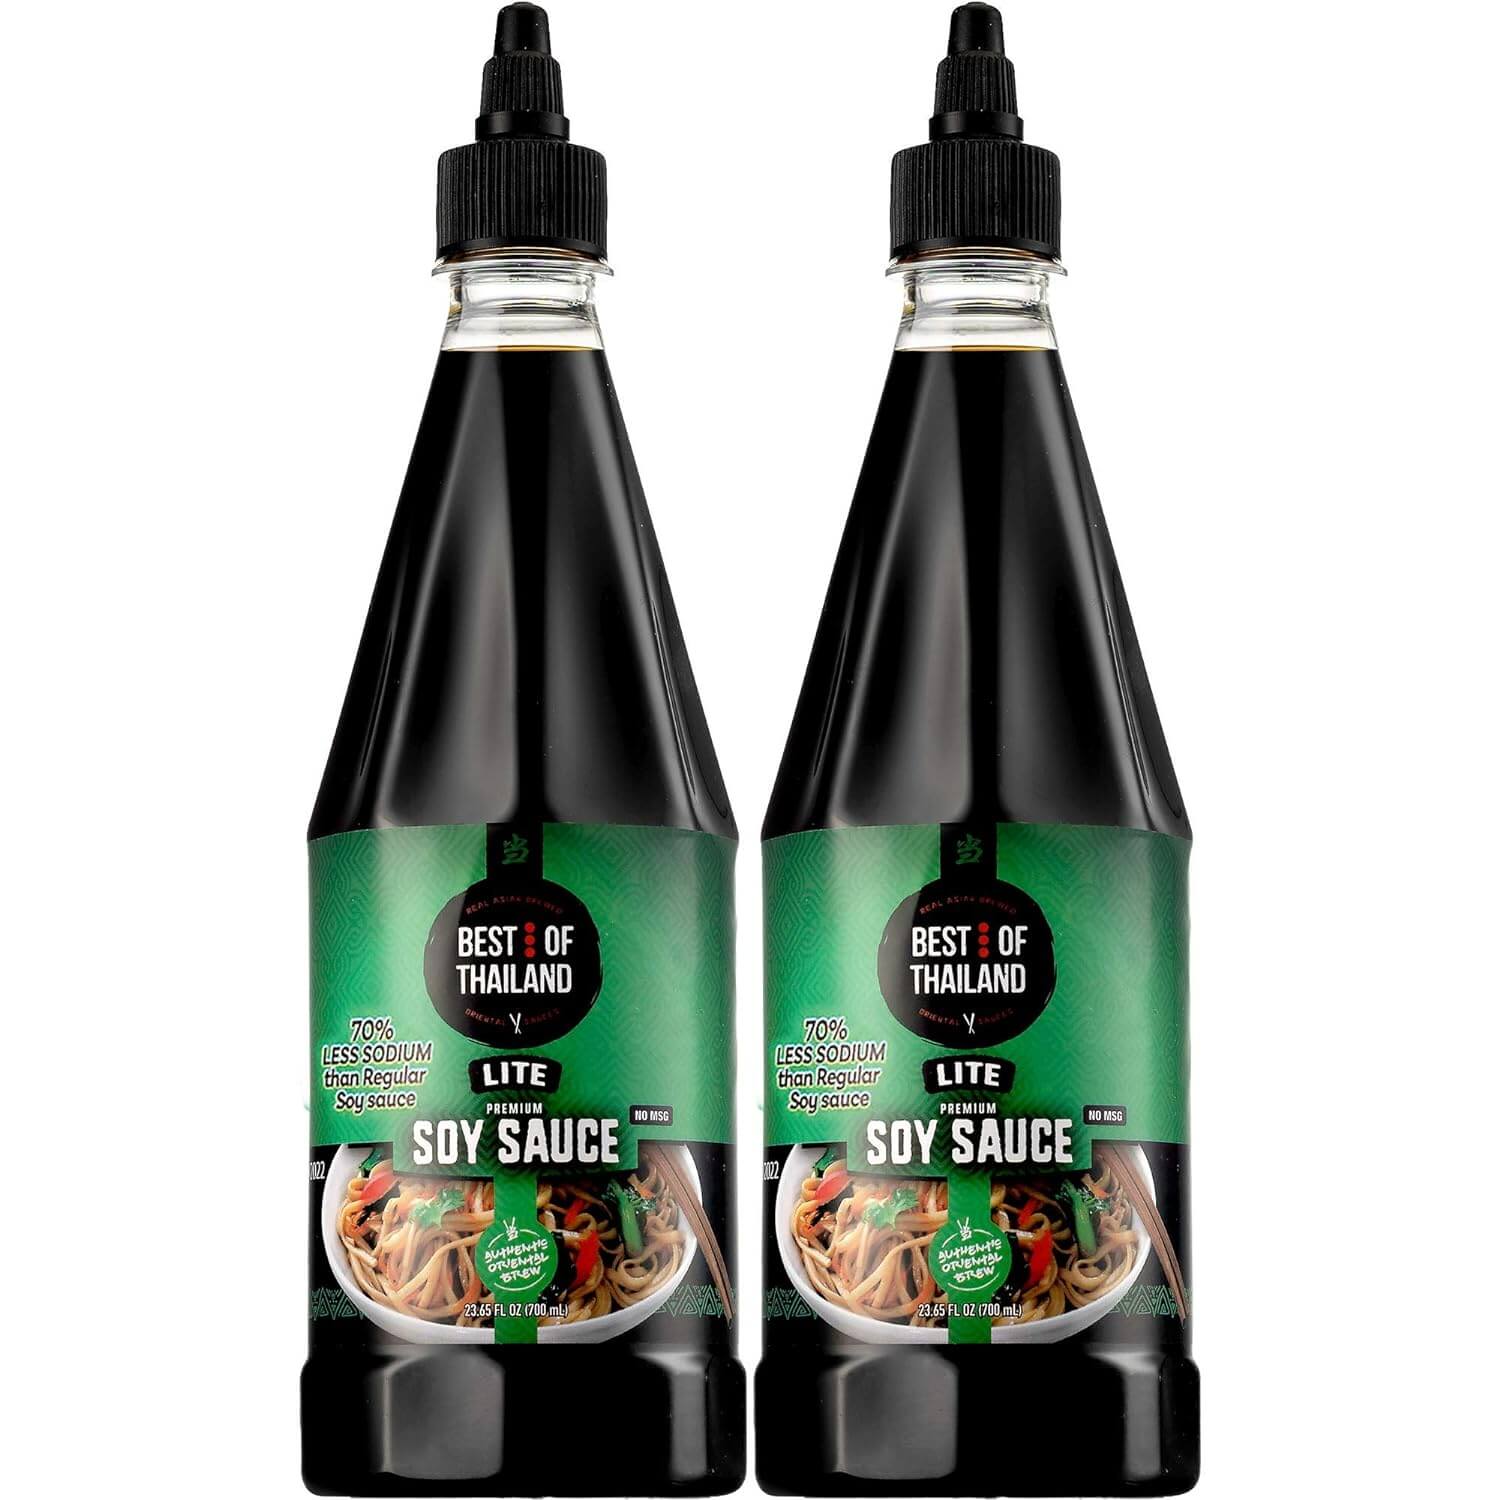 Best of Thailand Lite Soy Sauce